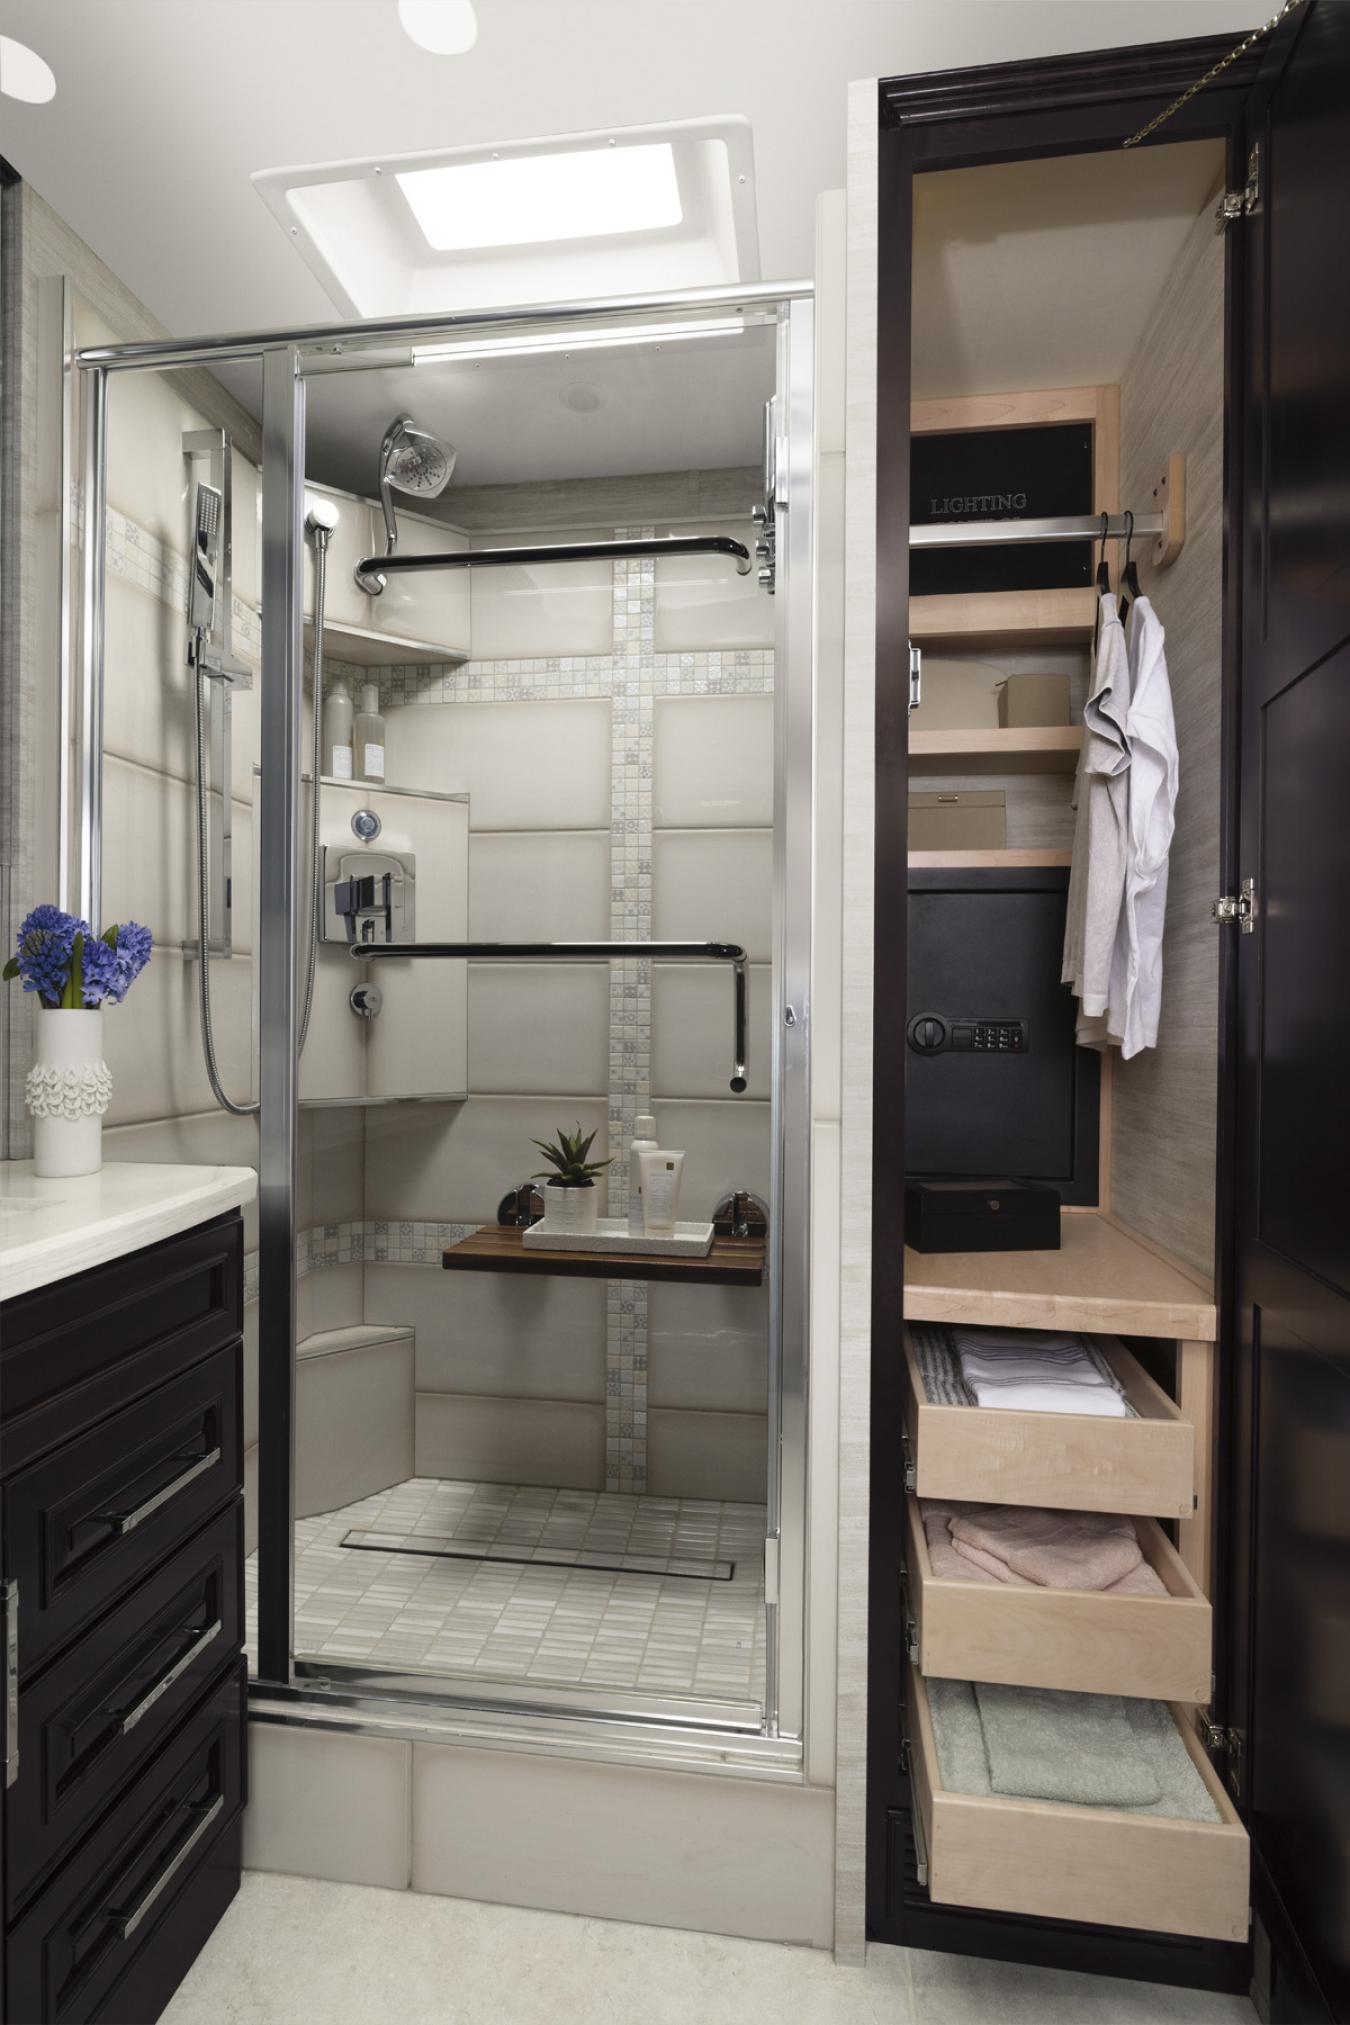 Supreme Aire shower and storage